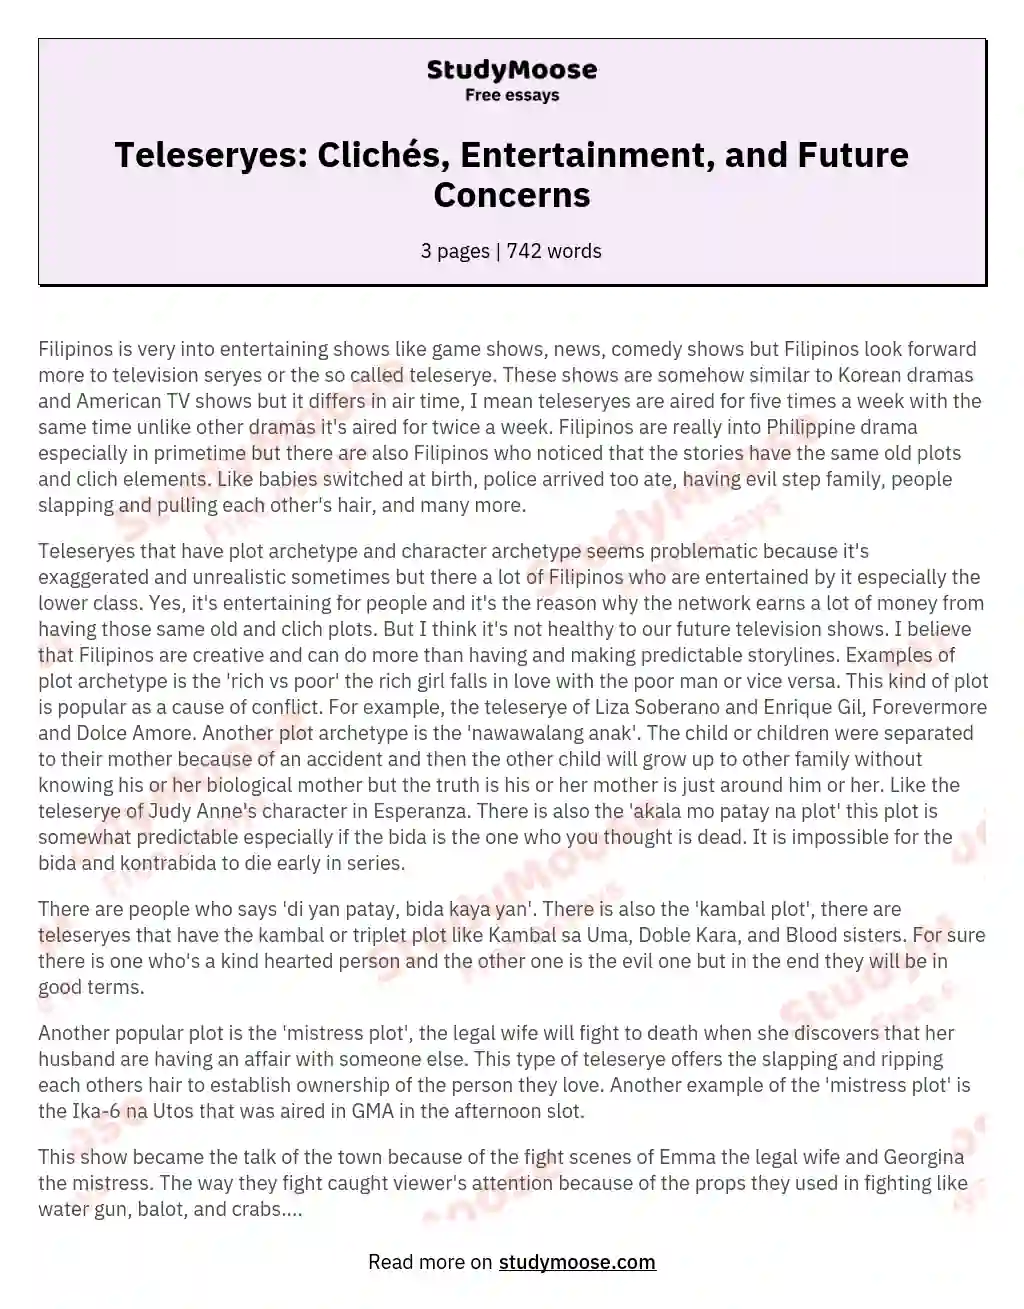 Teleseryes: Clichés, Entertainment, and Future Concerns essay